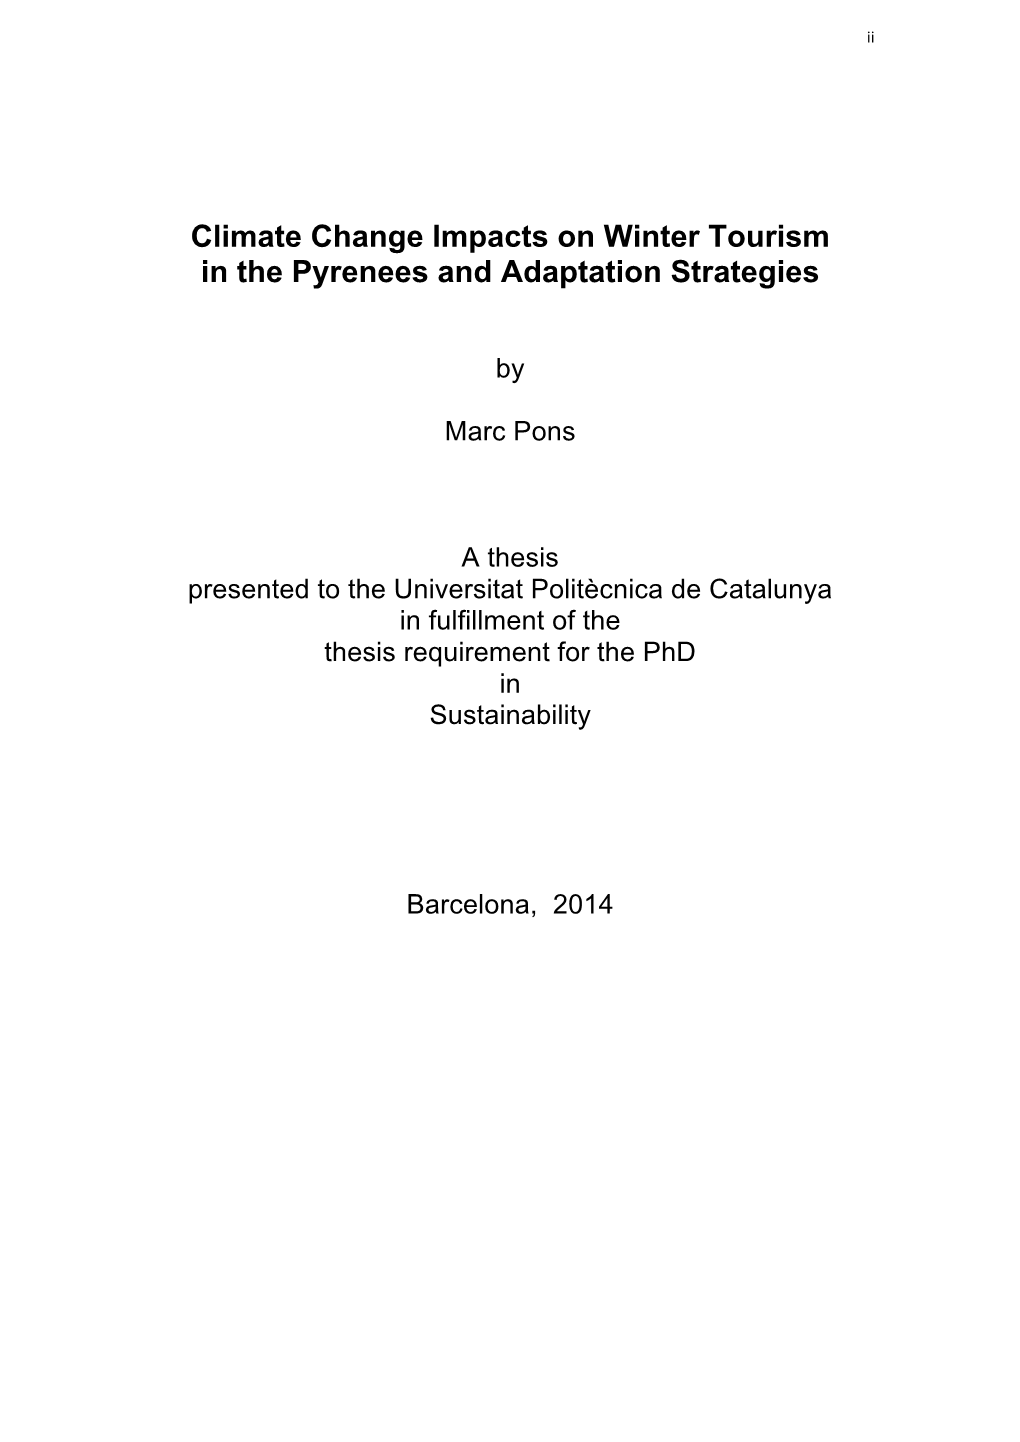 Climate Change Impacts on Winter Tourism in the Pyrenees and Adaptation Strategies